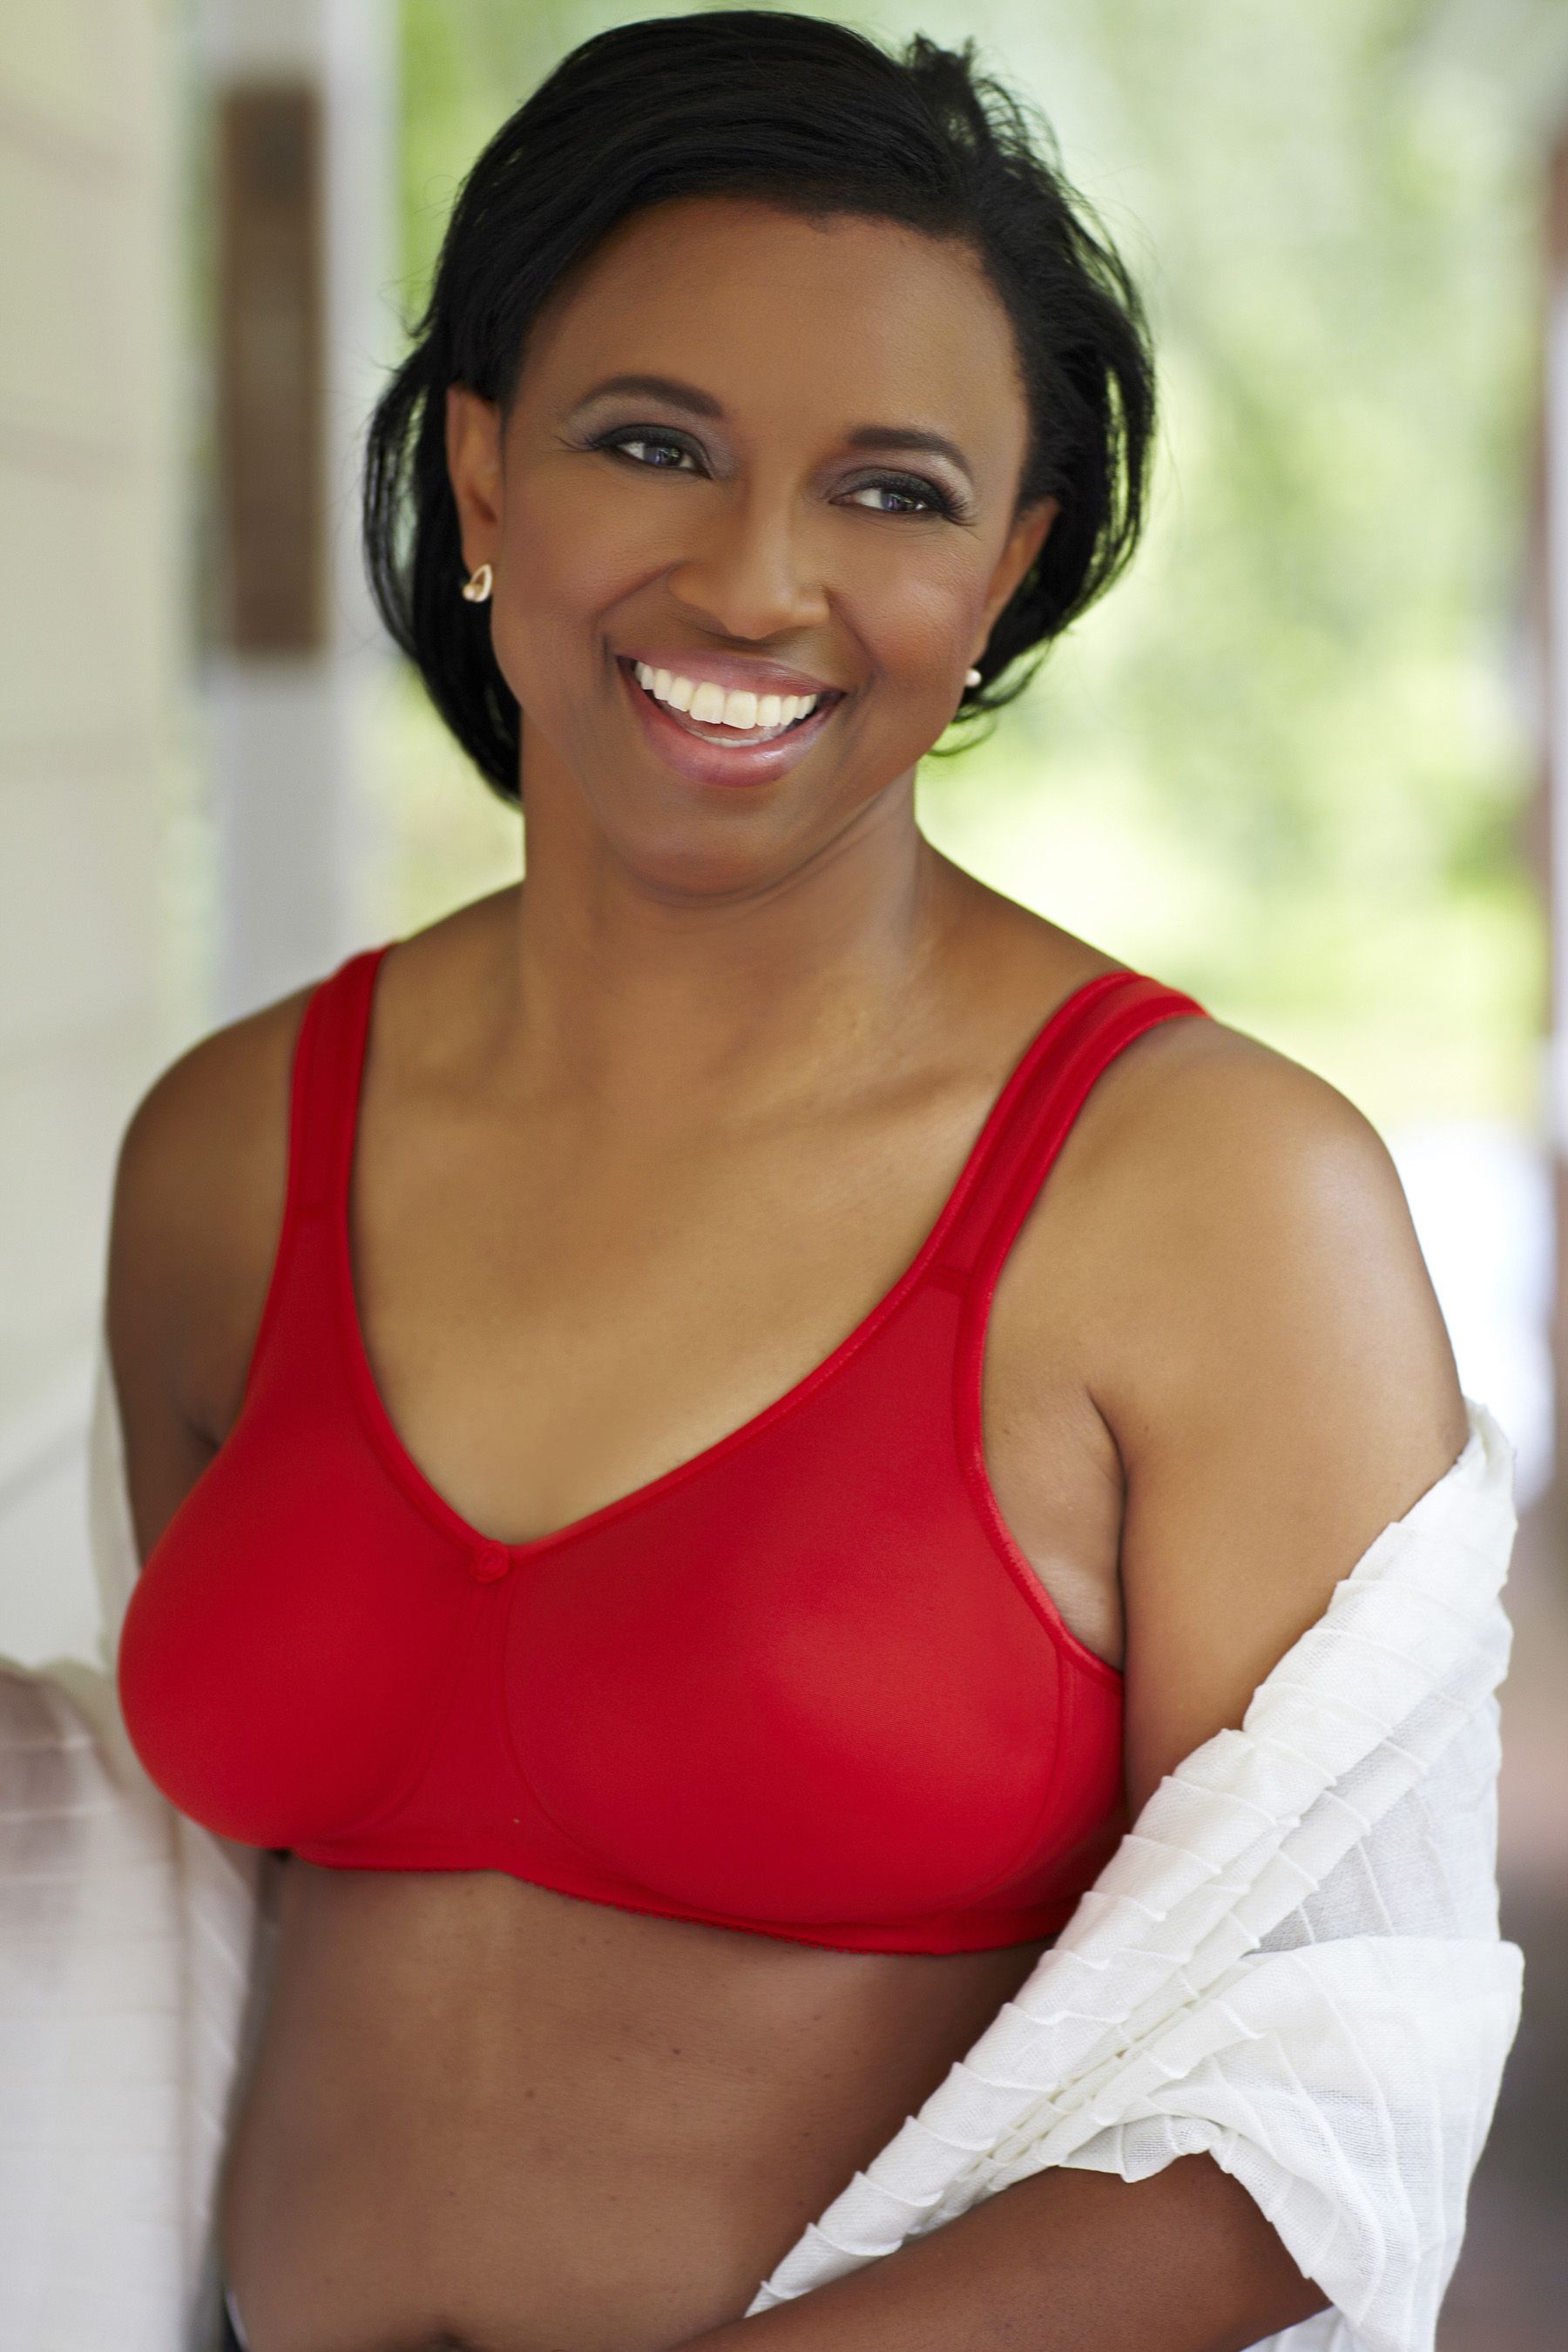 American Breast Care Mastectomy Bra Soft Shape T-Shirt Size 42A